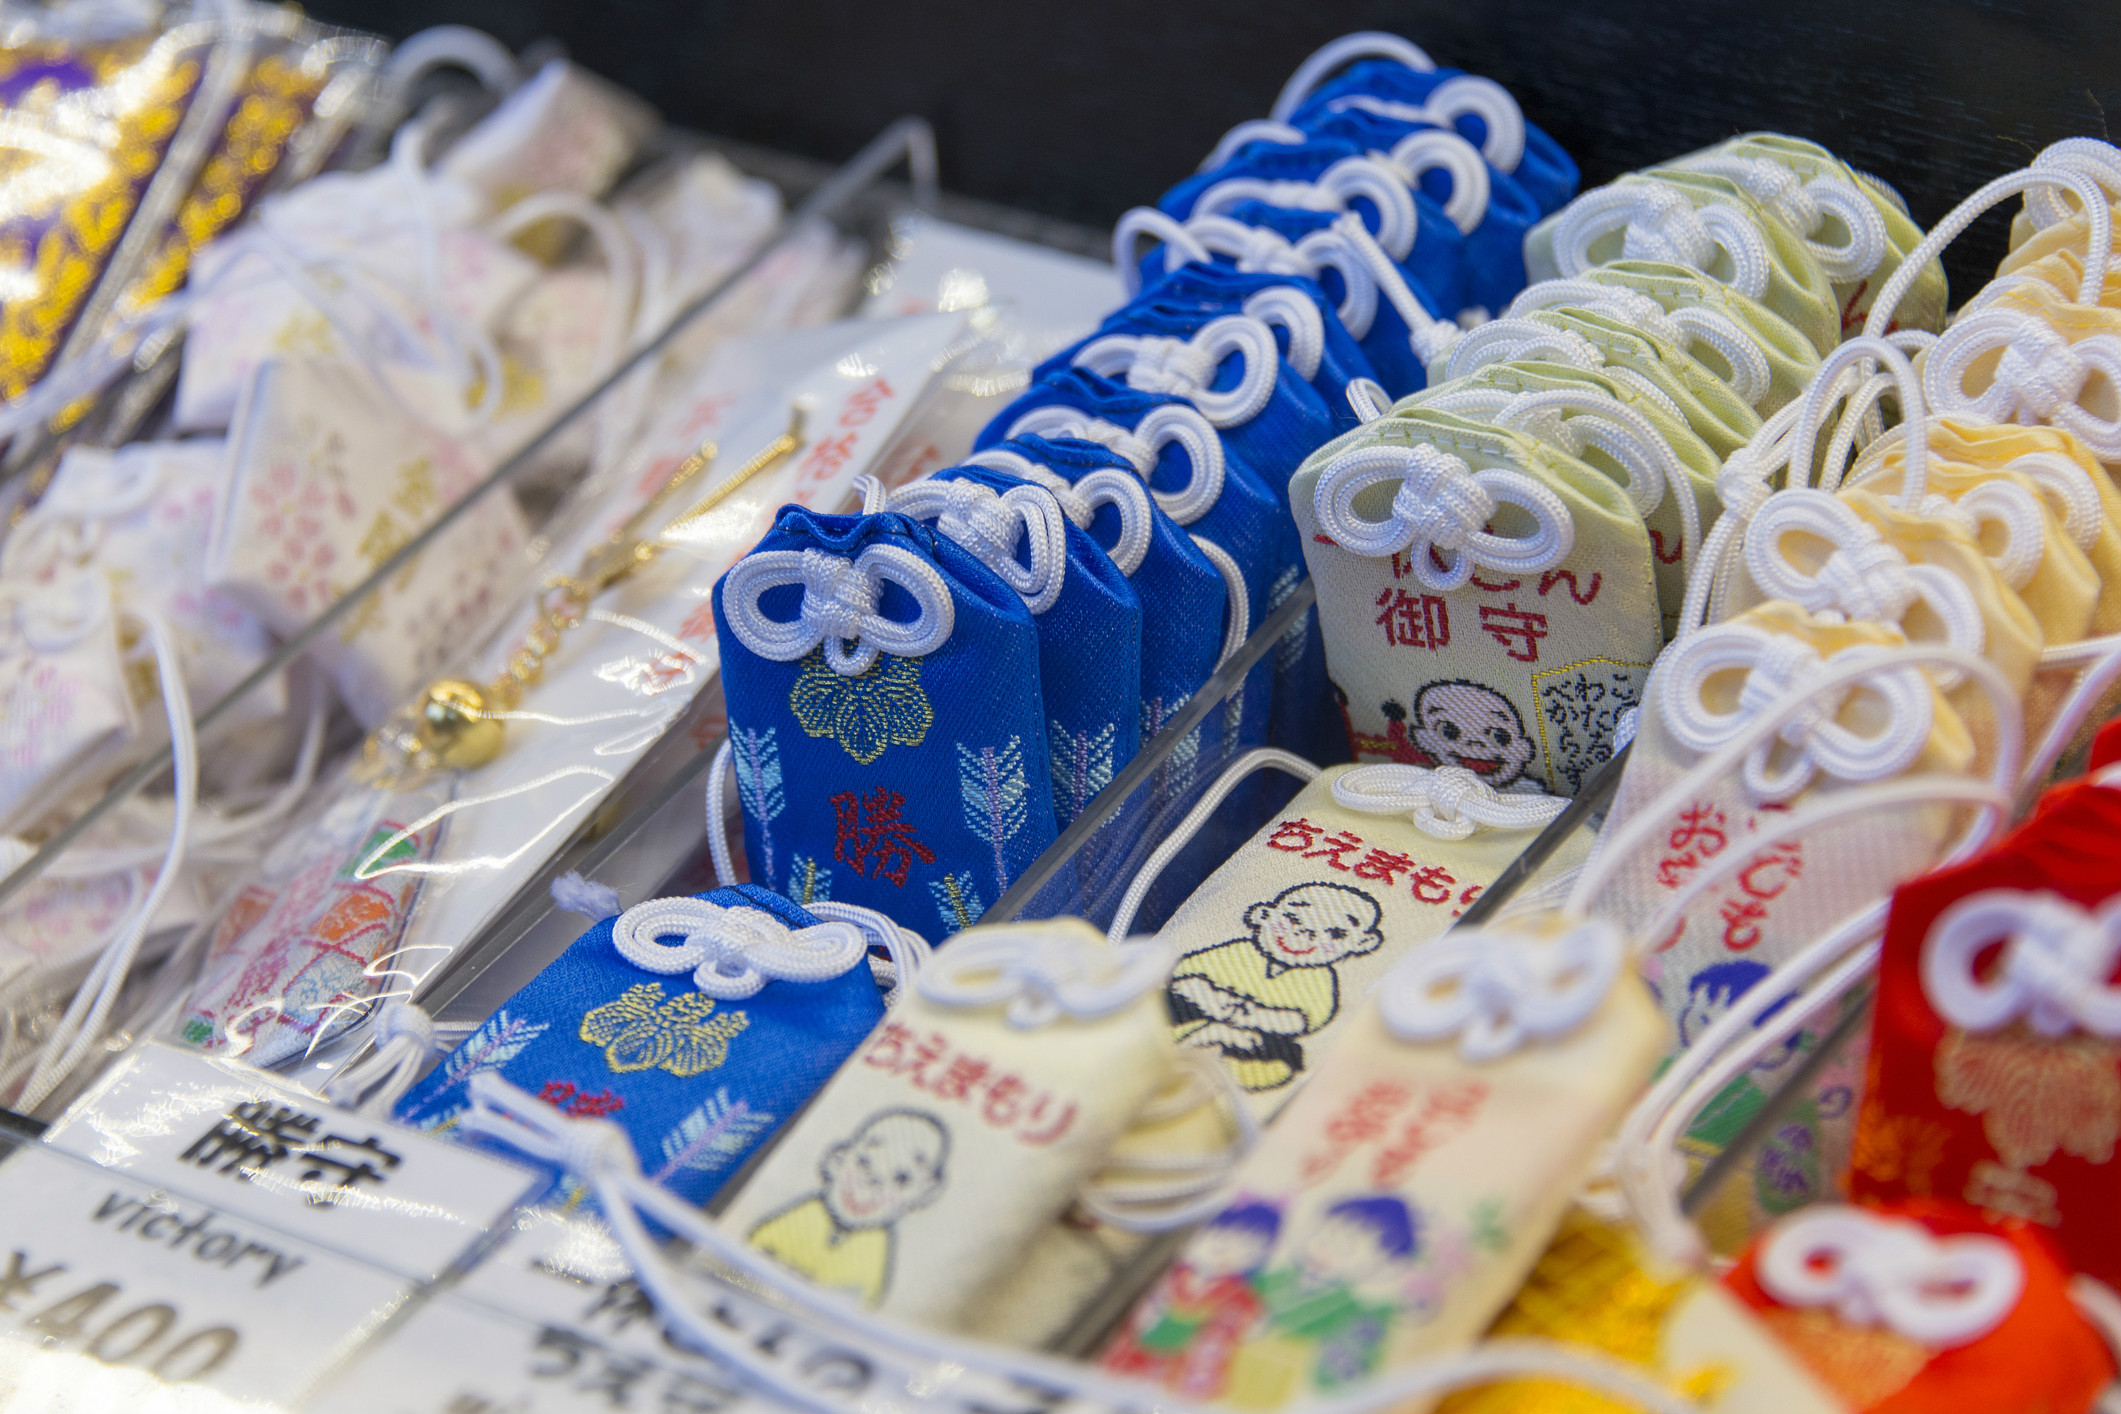 What do you do with an omamori lucky charm?